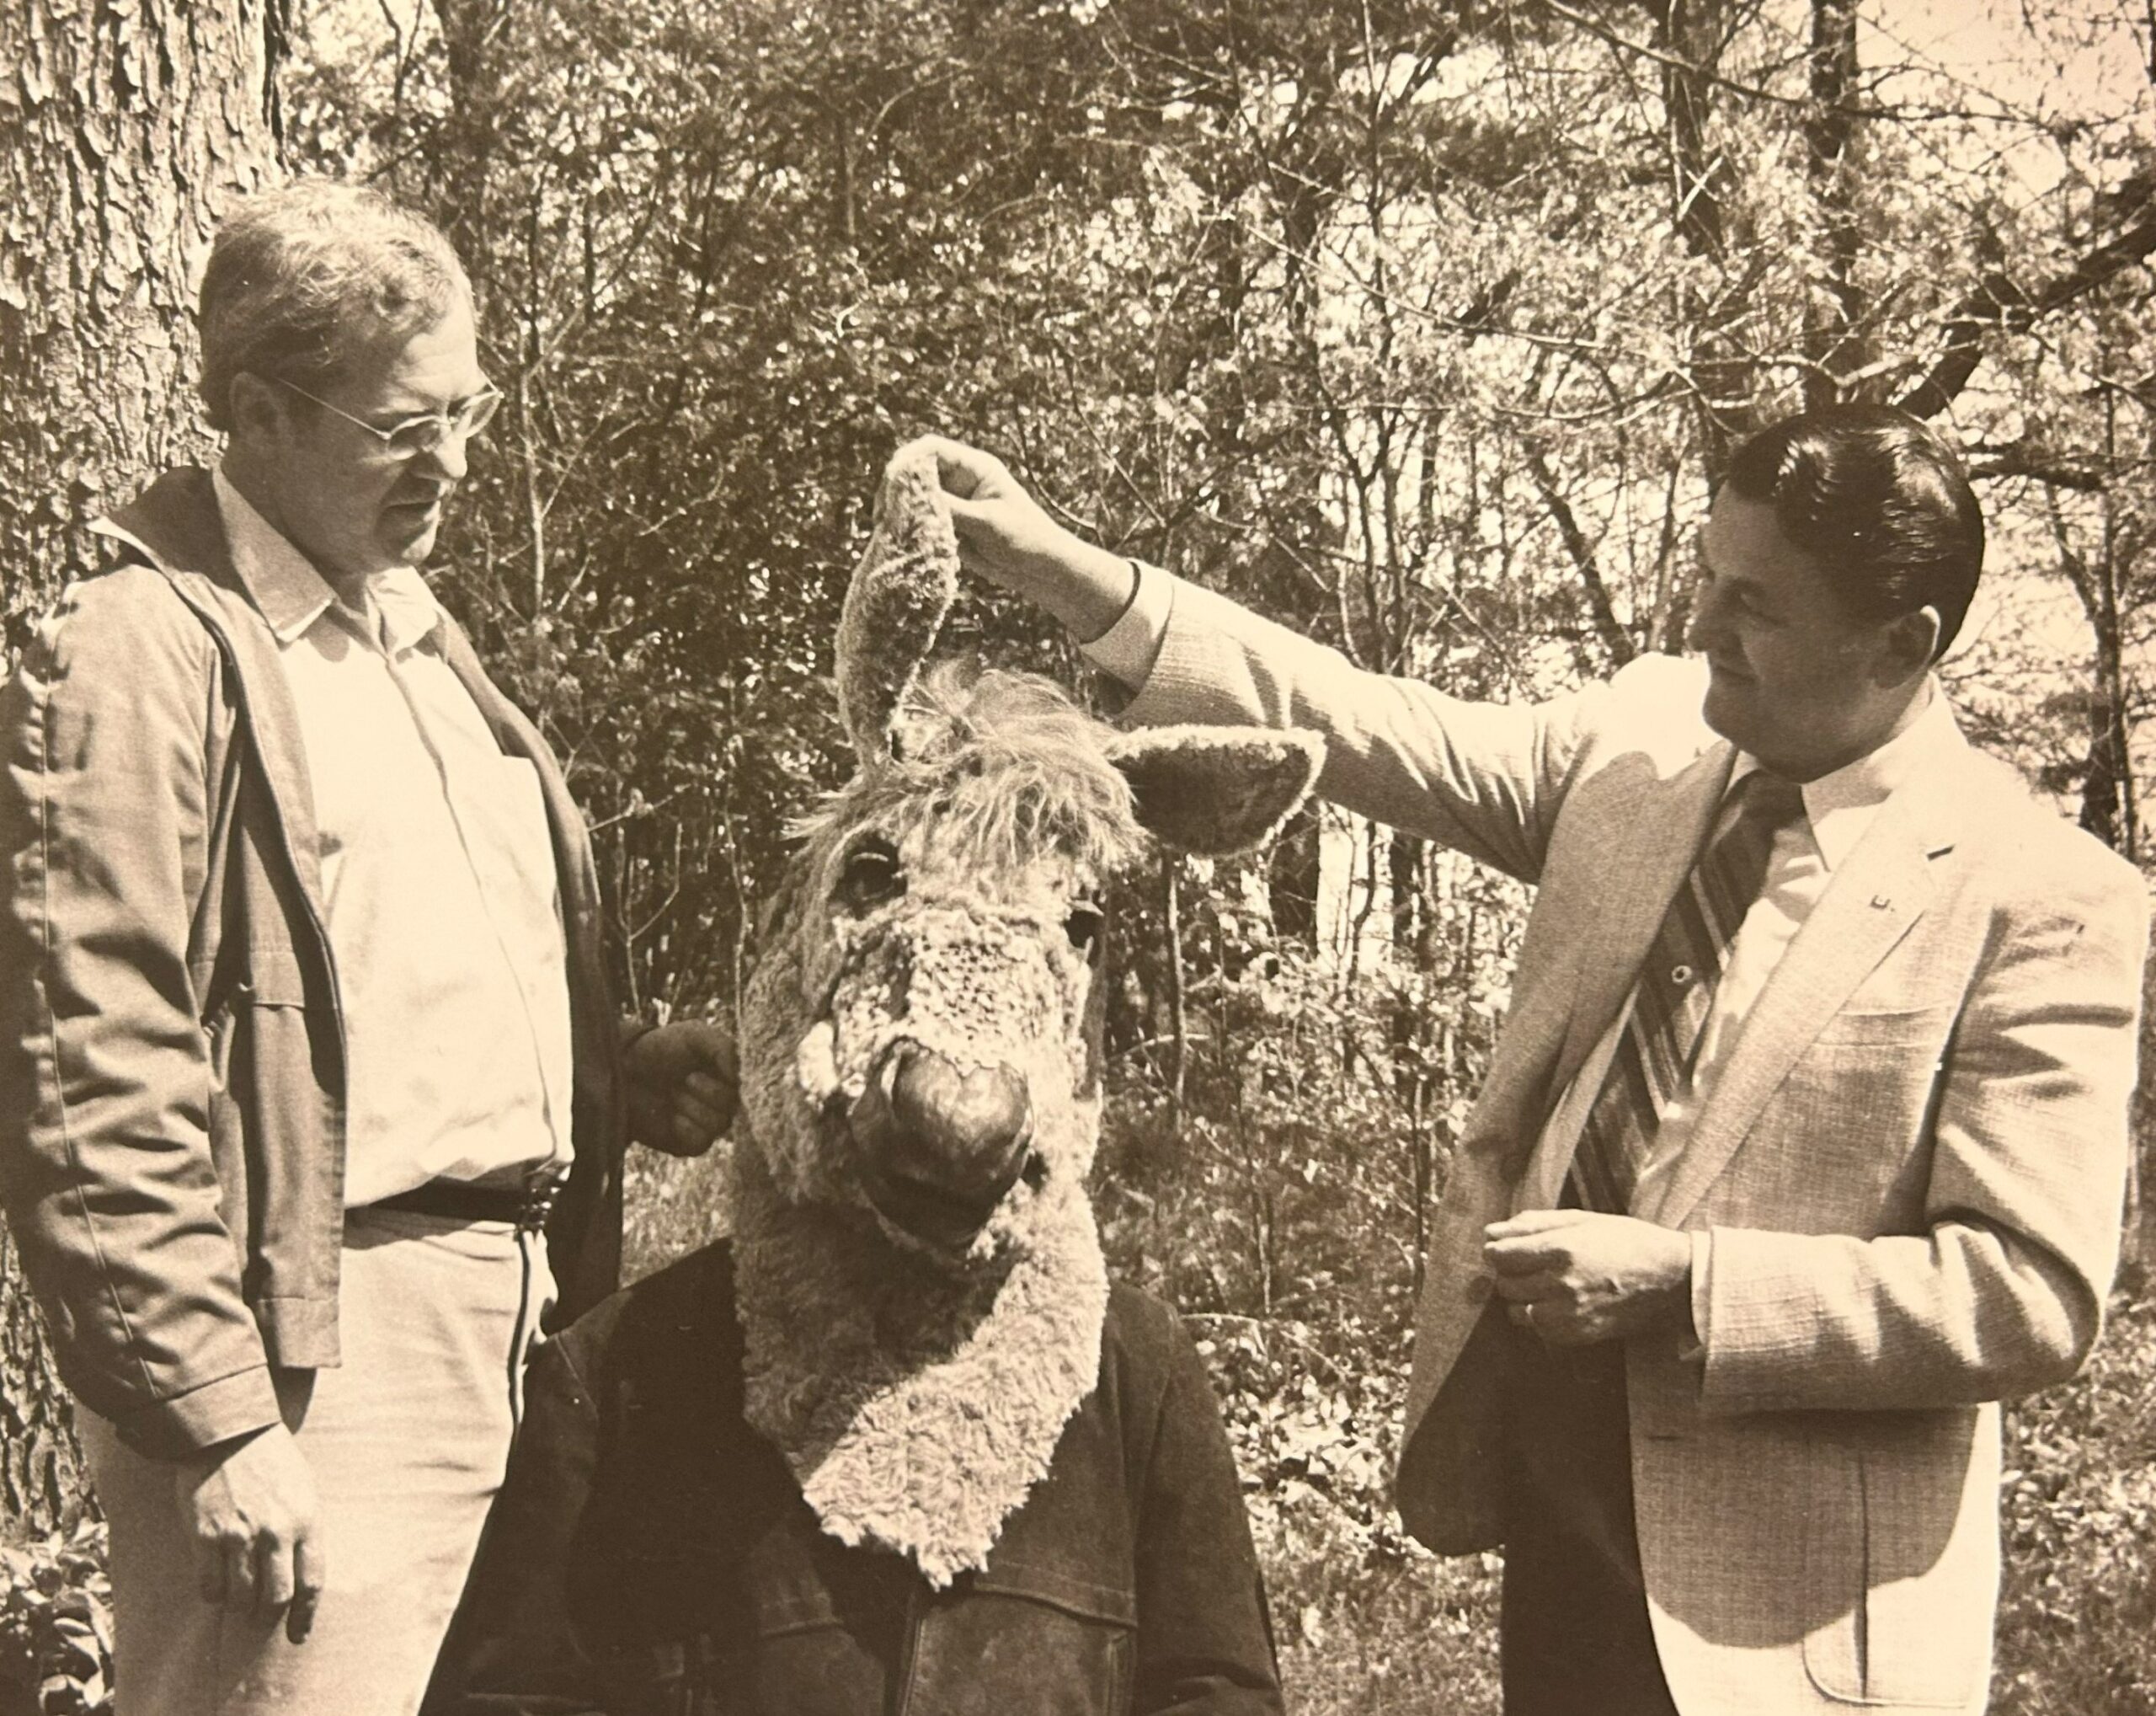 A septia-toned photo of the first ever Dream in High Park Production of William Shakespeare's A Midsummer Night's Dream in 1983. Three performers are pictured, two in shirts and jackets and the third dressed as a donkey. Image courtesy of Canadian Stage.